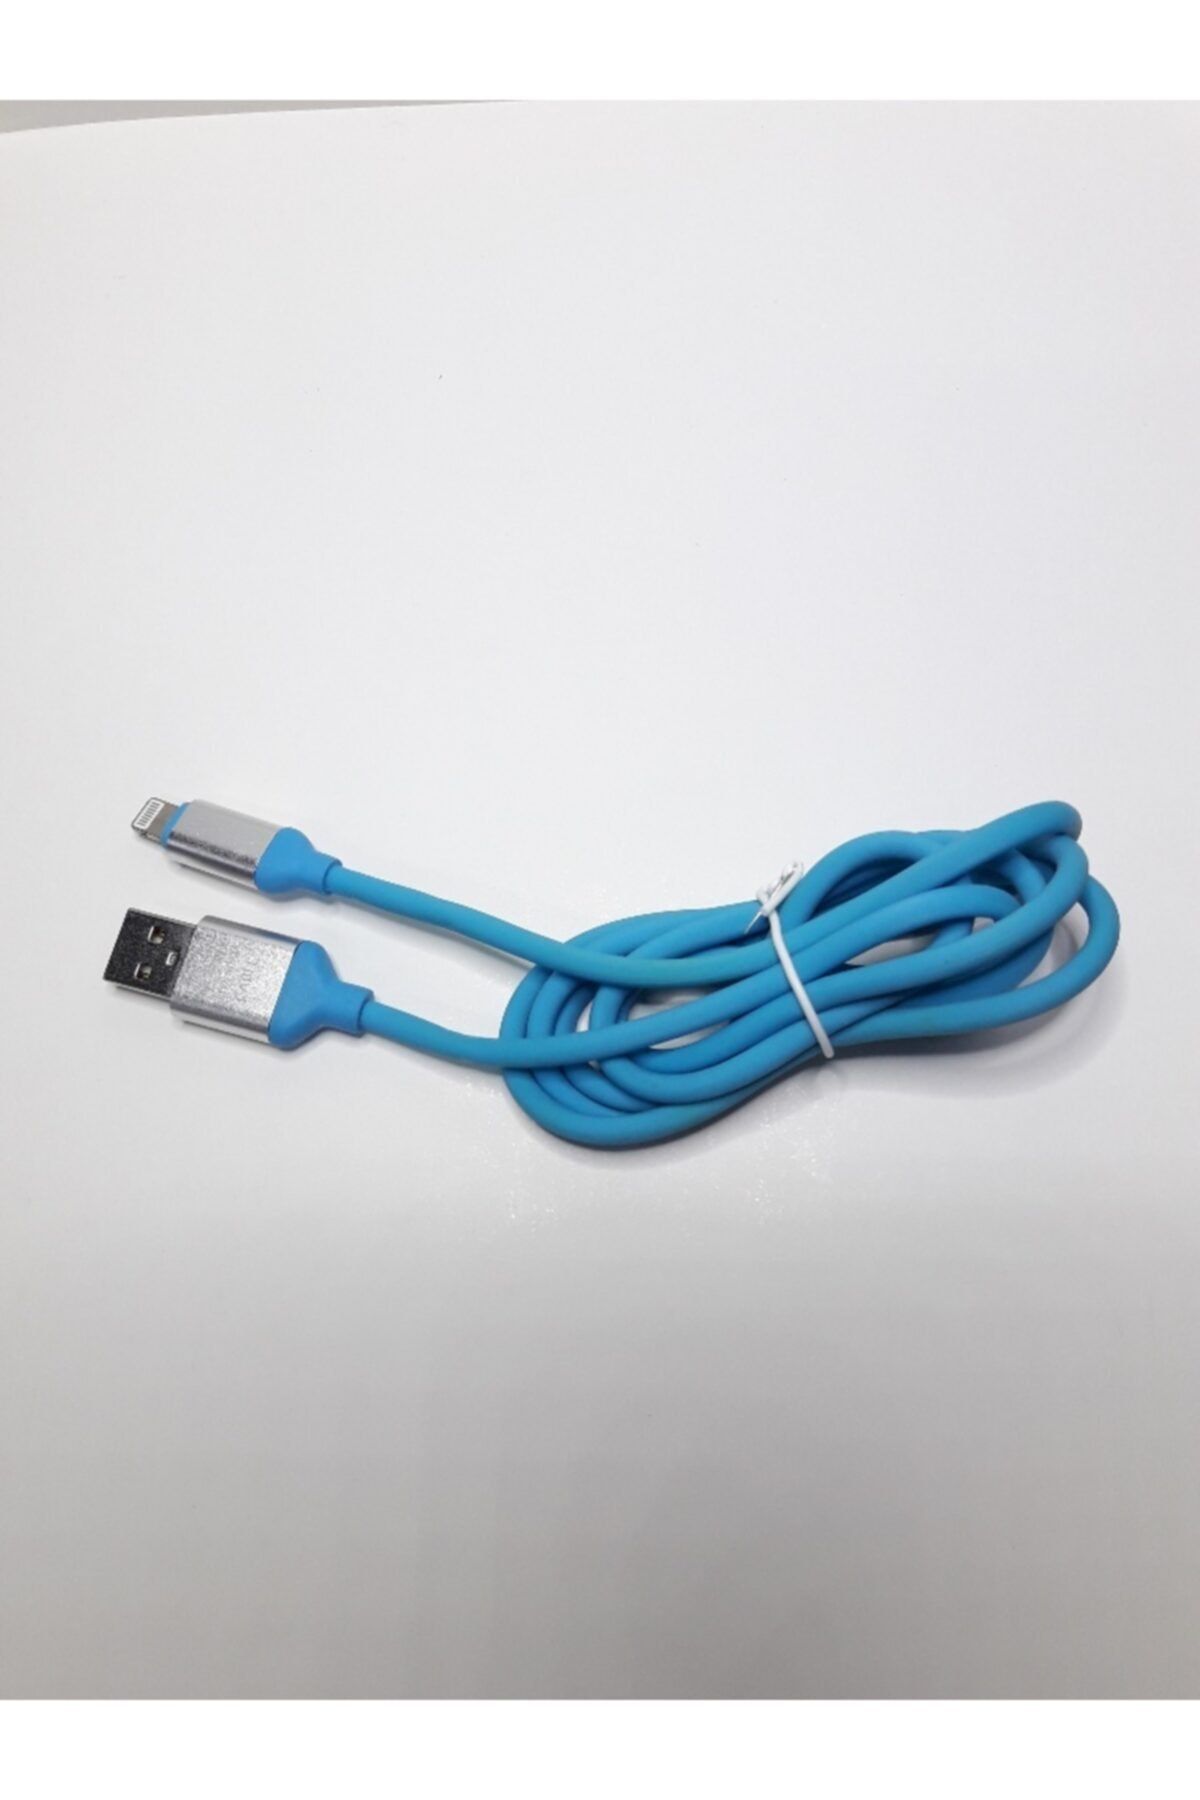 Platoon Usb Data Cable (For Iphone)